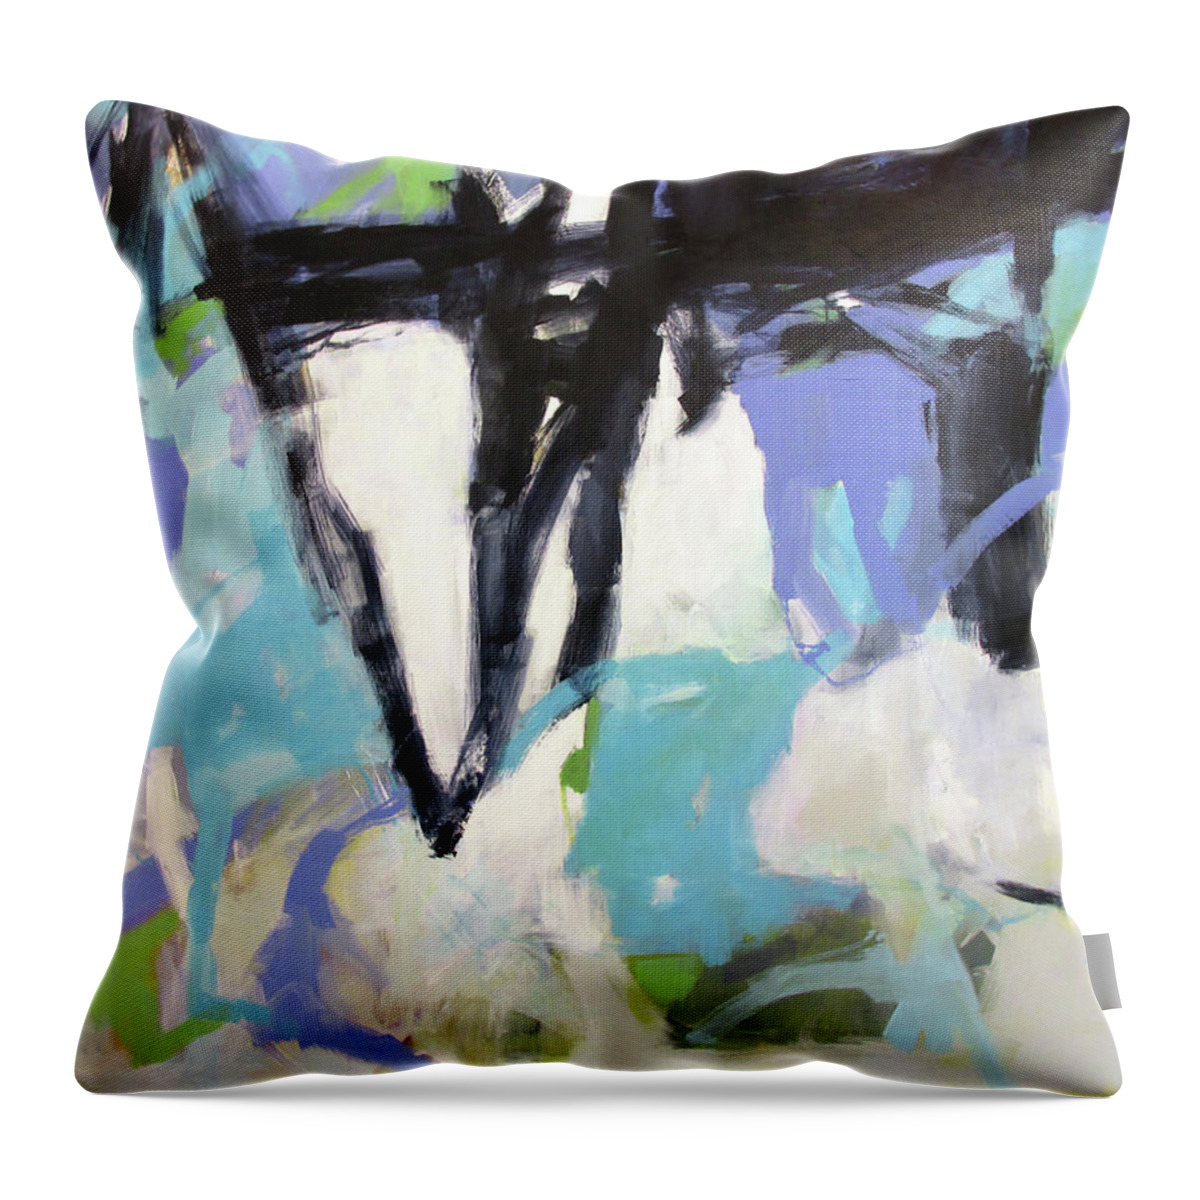 Starry Night Throw Pillow featuring the painting Starry Night by Chris Gholson